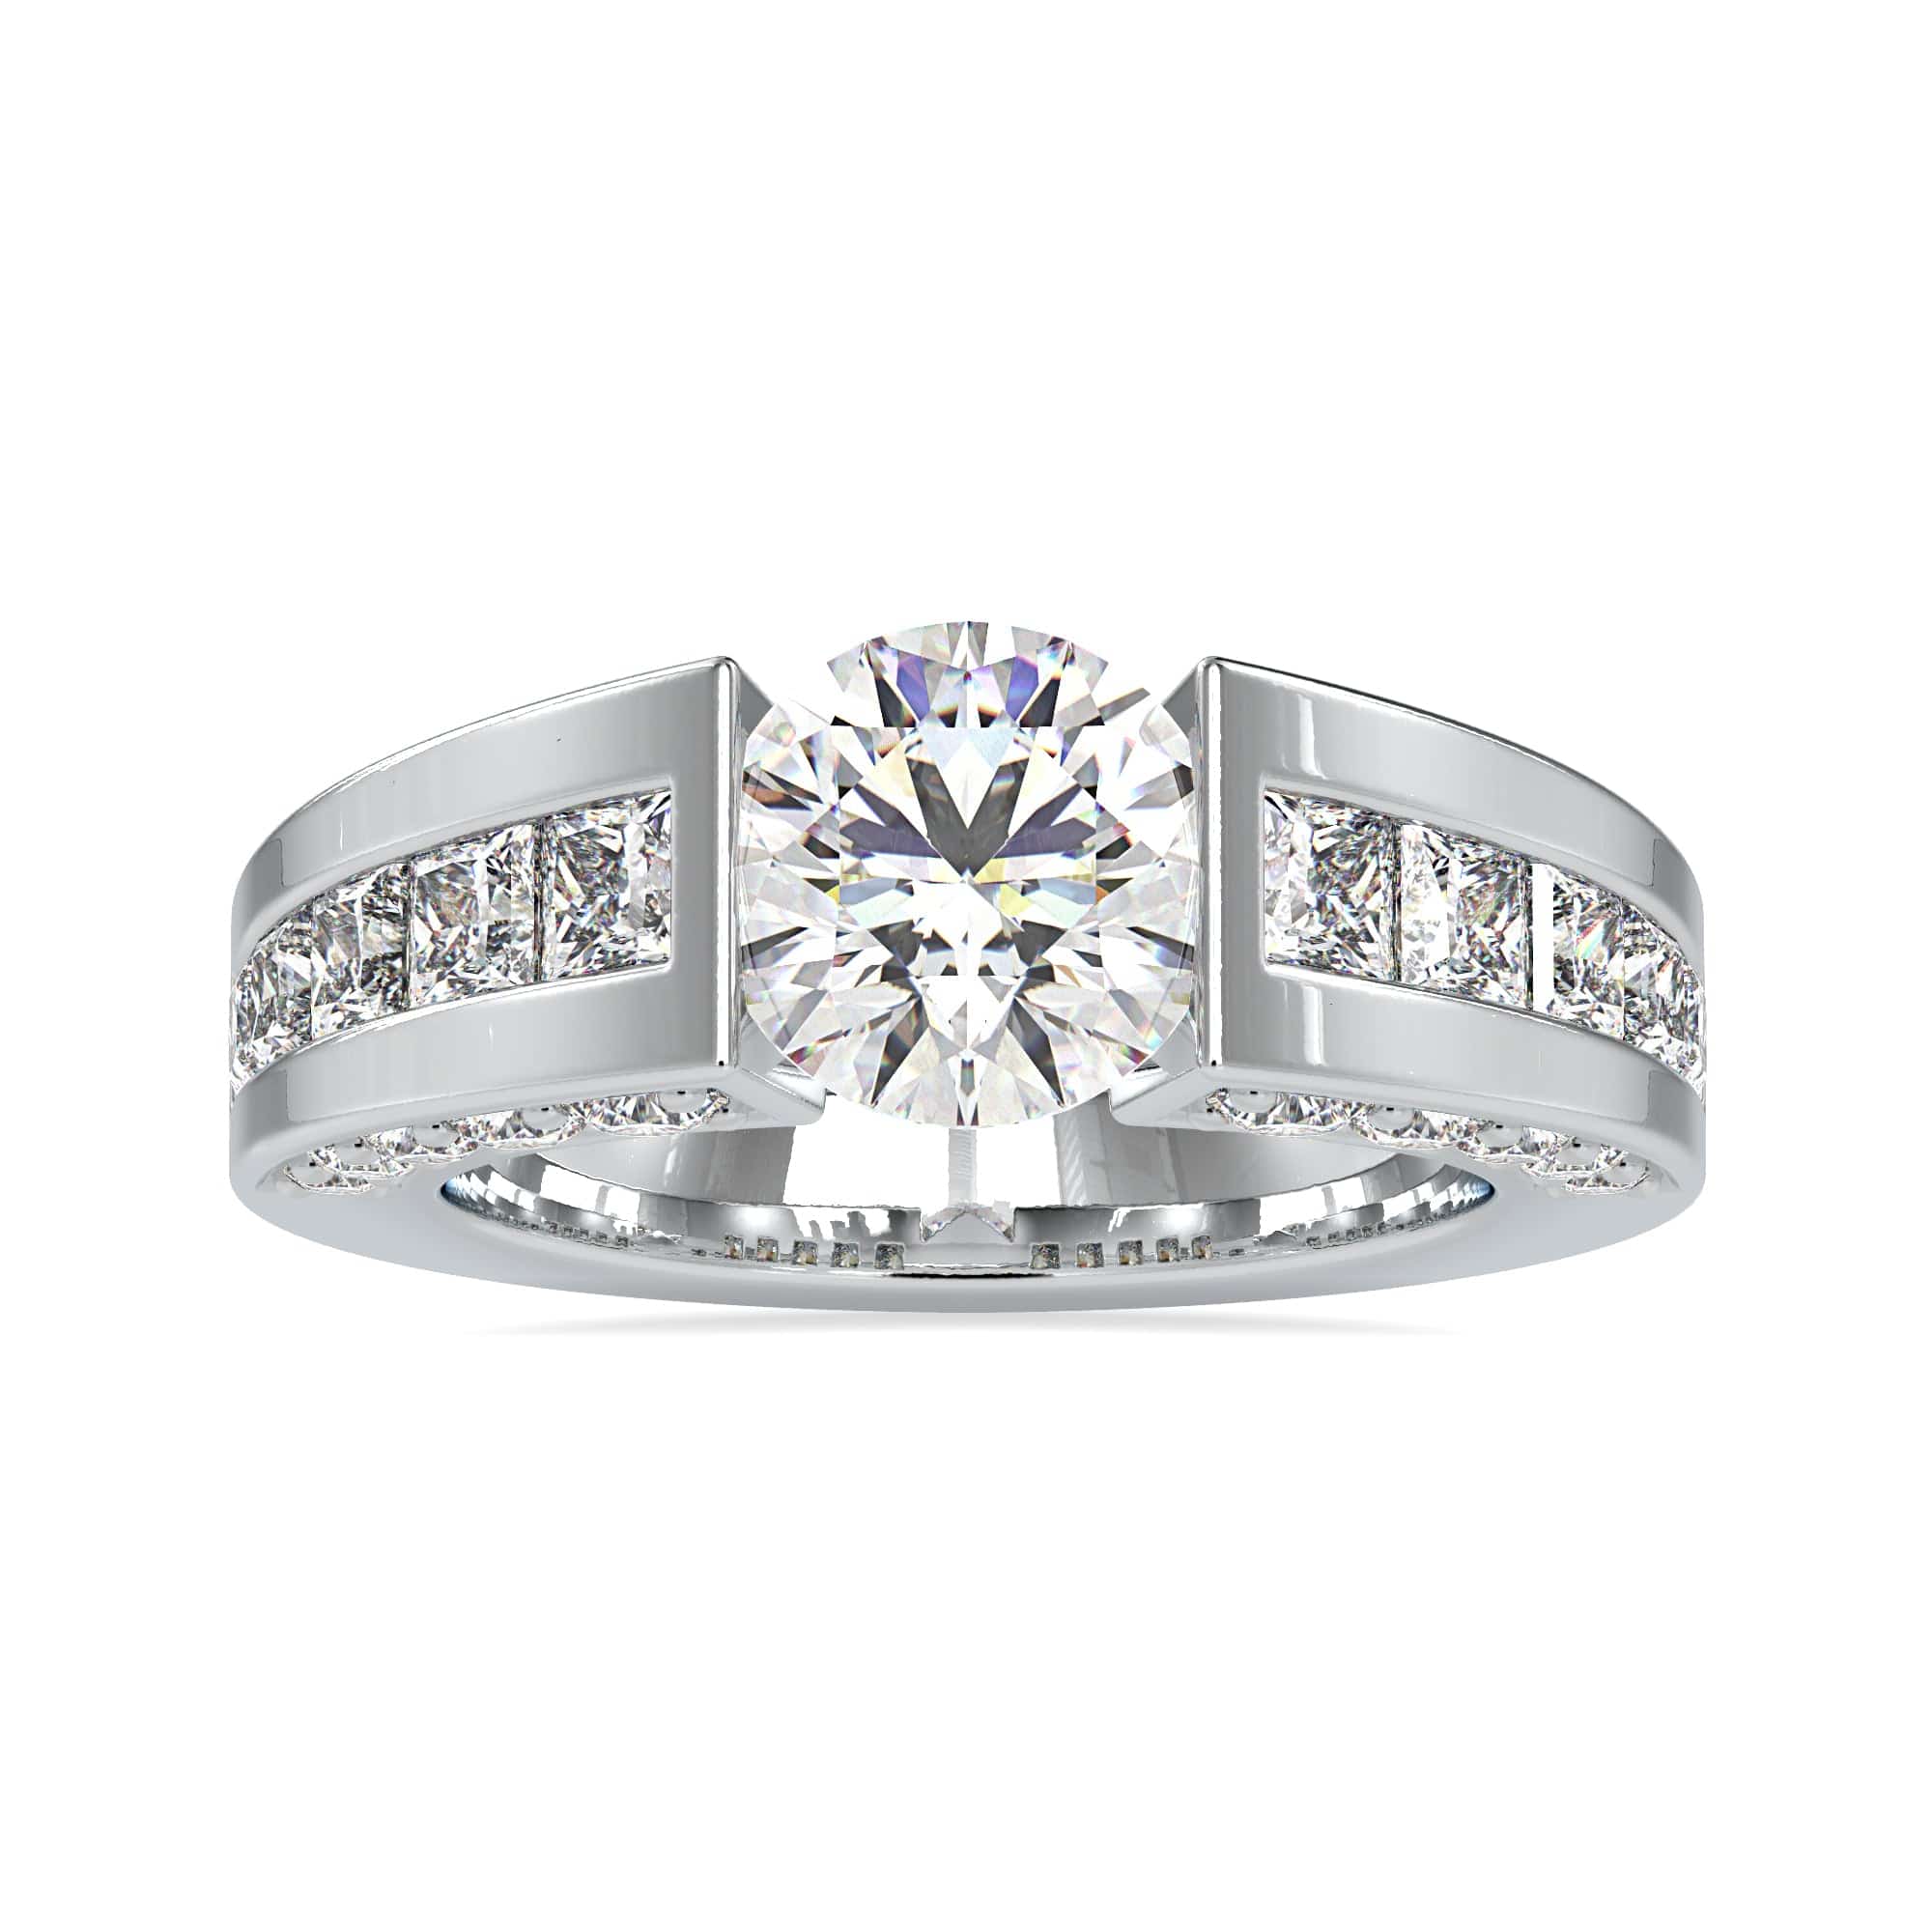 Classic Cushion style halo diamond engagement ring with top micro pave